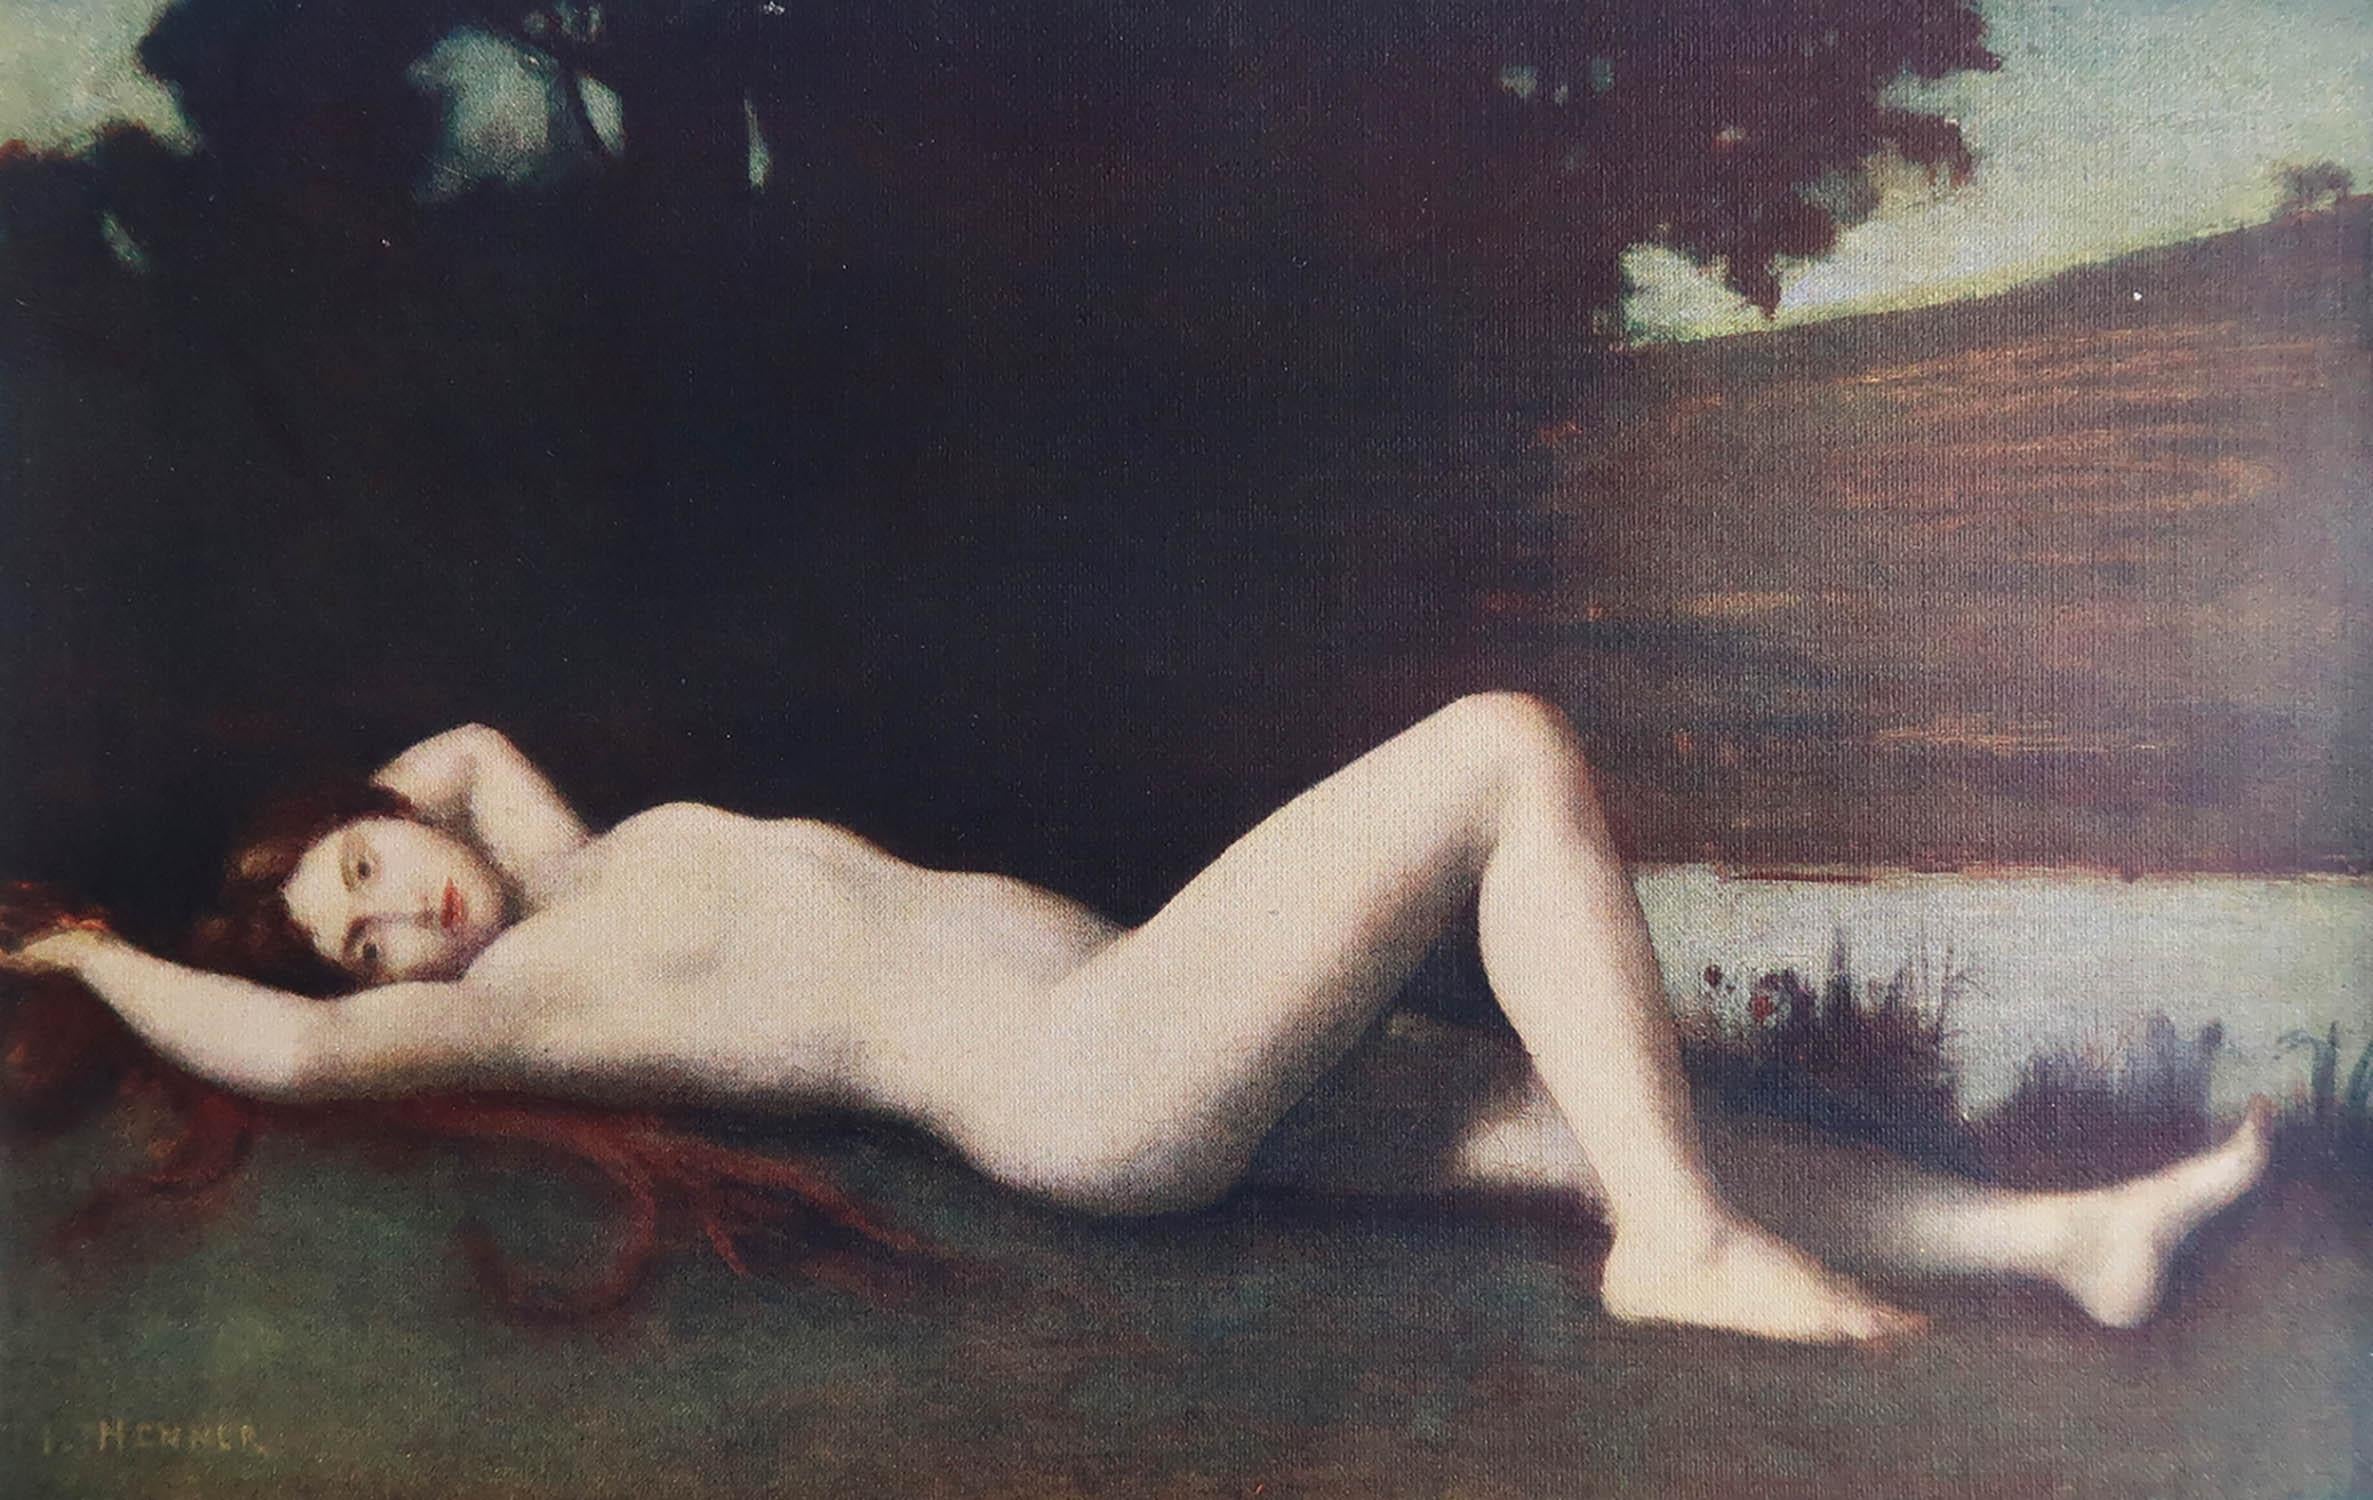 Wonderful print after Jean Jacques Henner

Lovely colors.

Tipped in plate on good quality paper

Chromolithograph 

Published circa 1920

The measurement given below is the off white paper size, not the actual image.

Unframed.

